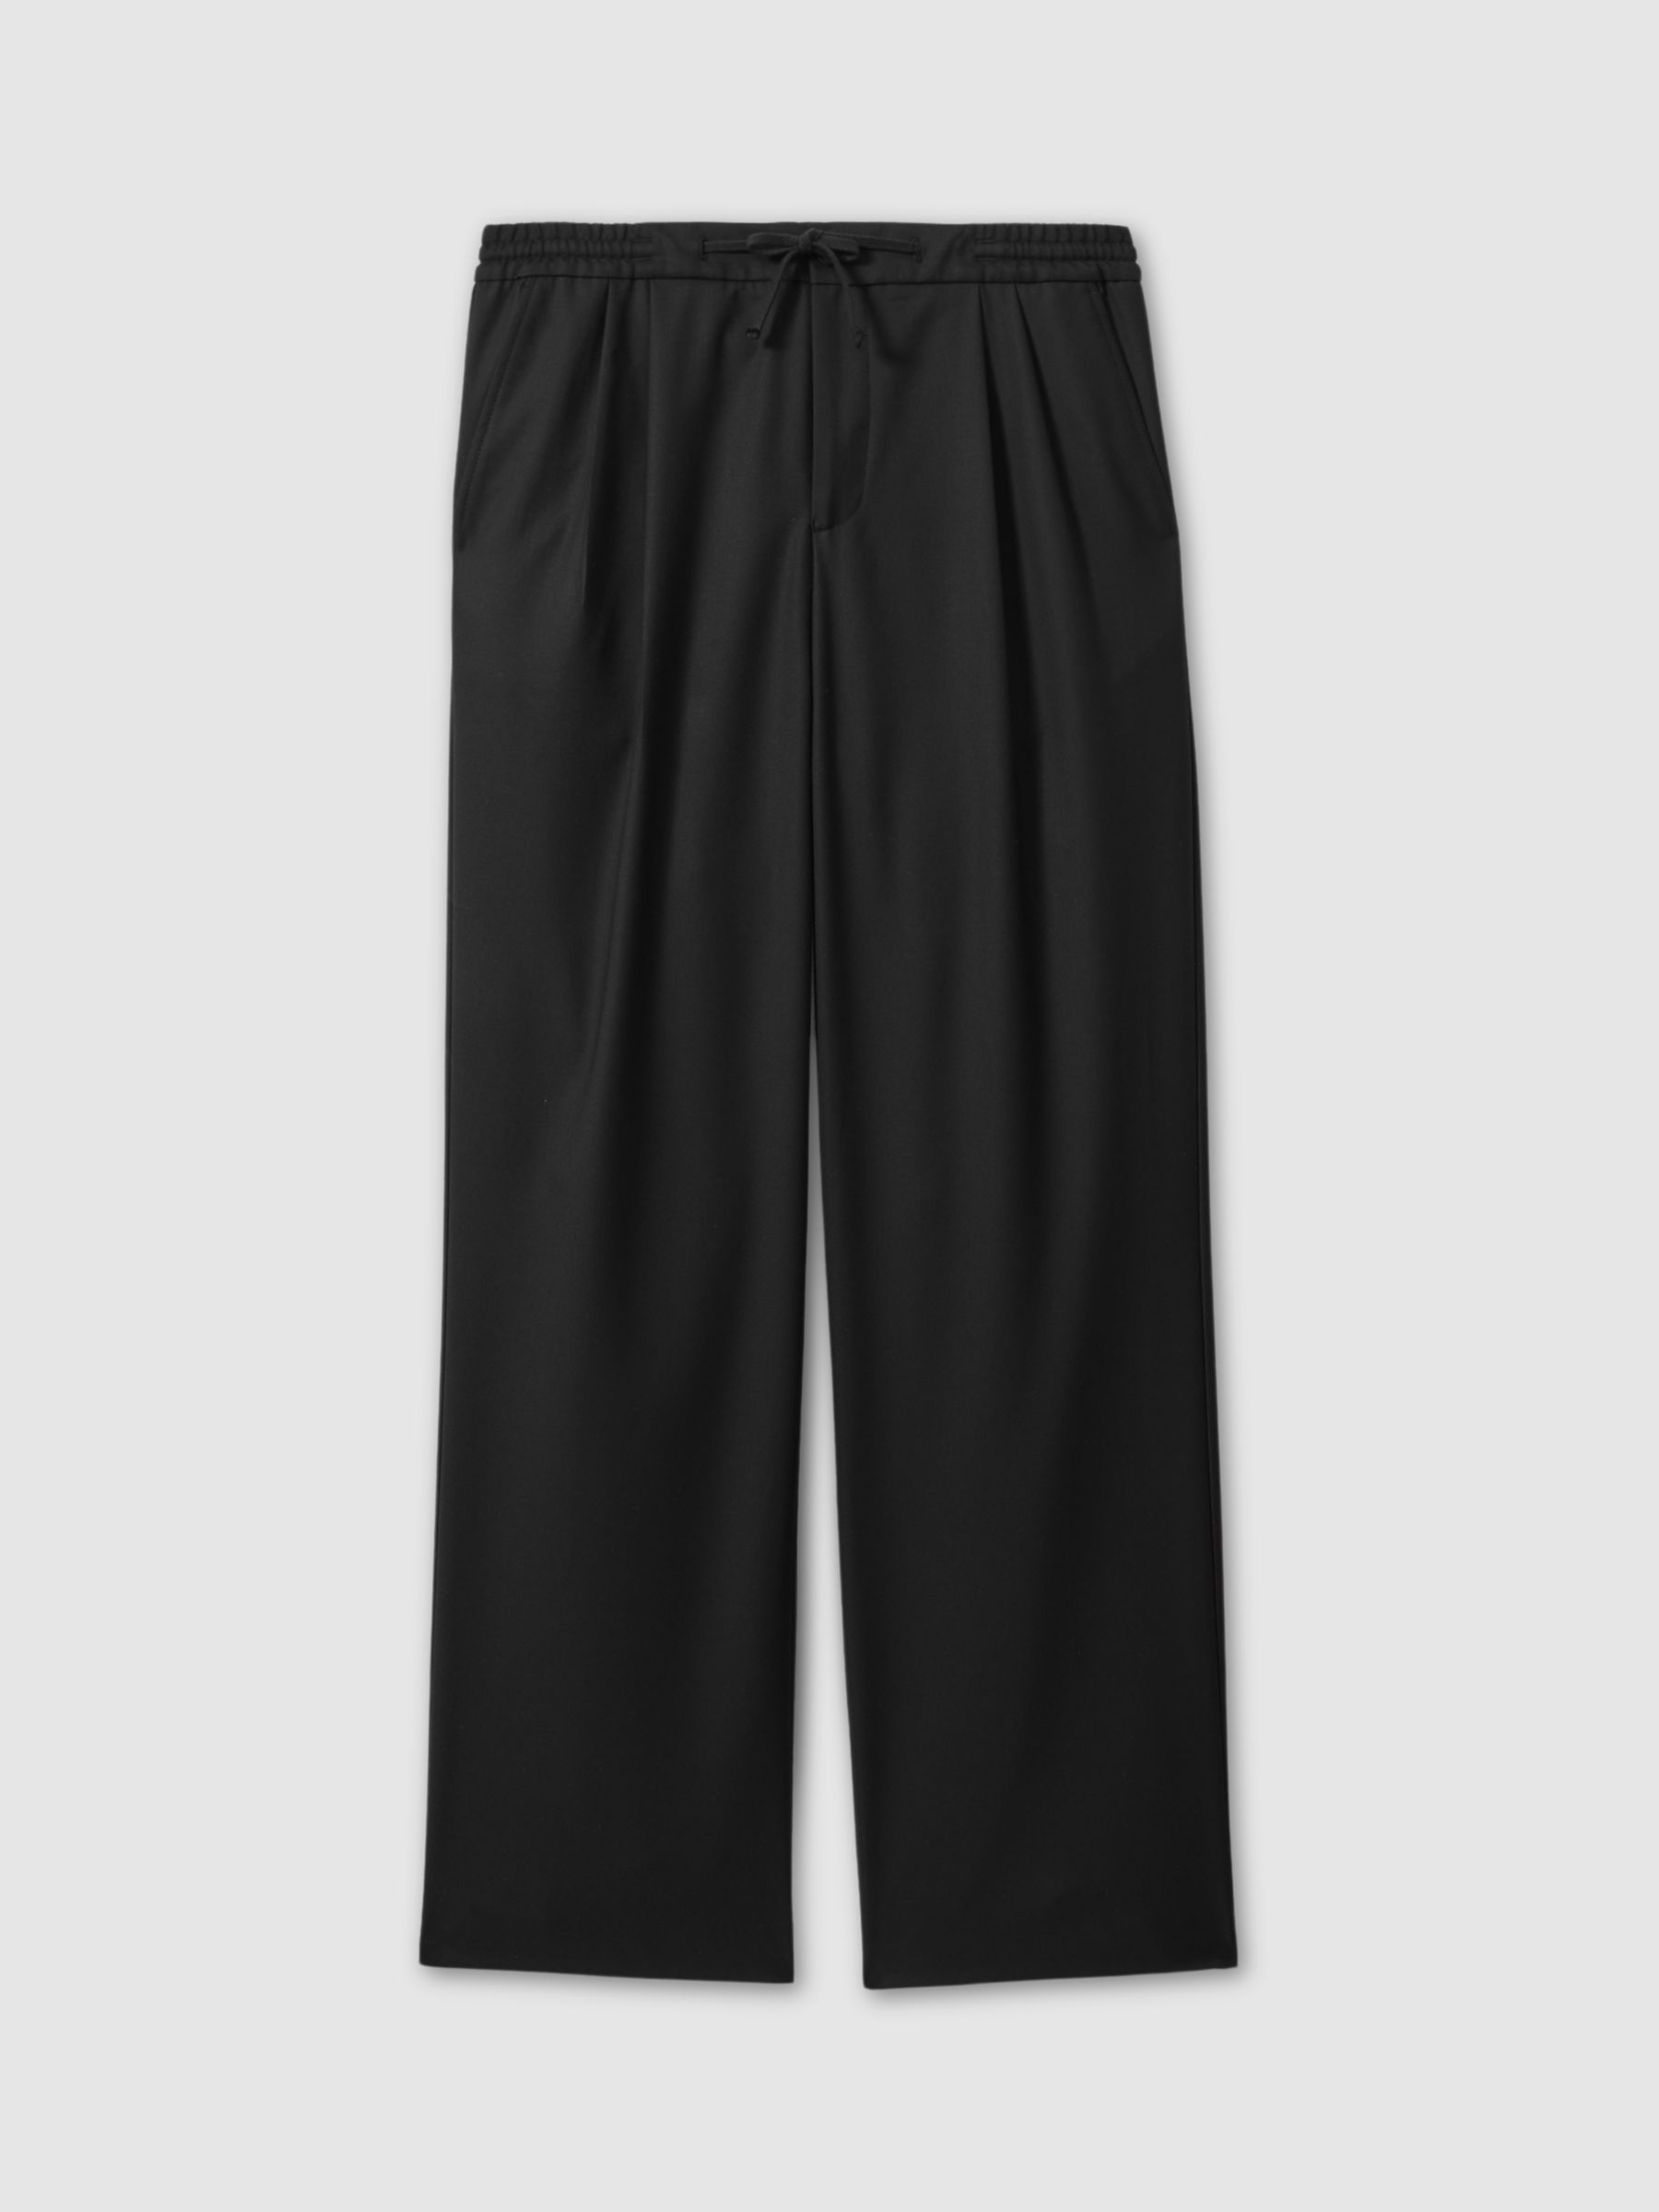 Reiss Arden Relaxed Twill Drawstring Trousers, Black, 34R